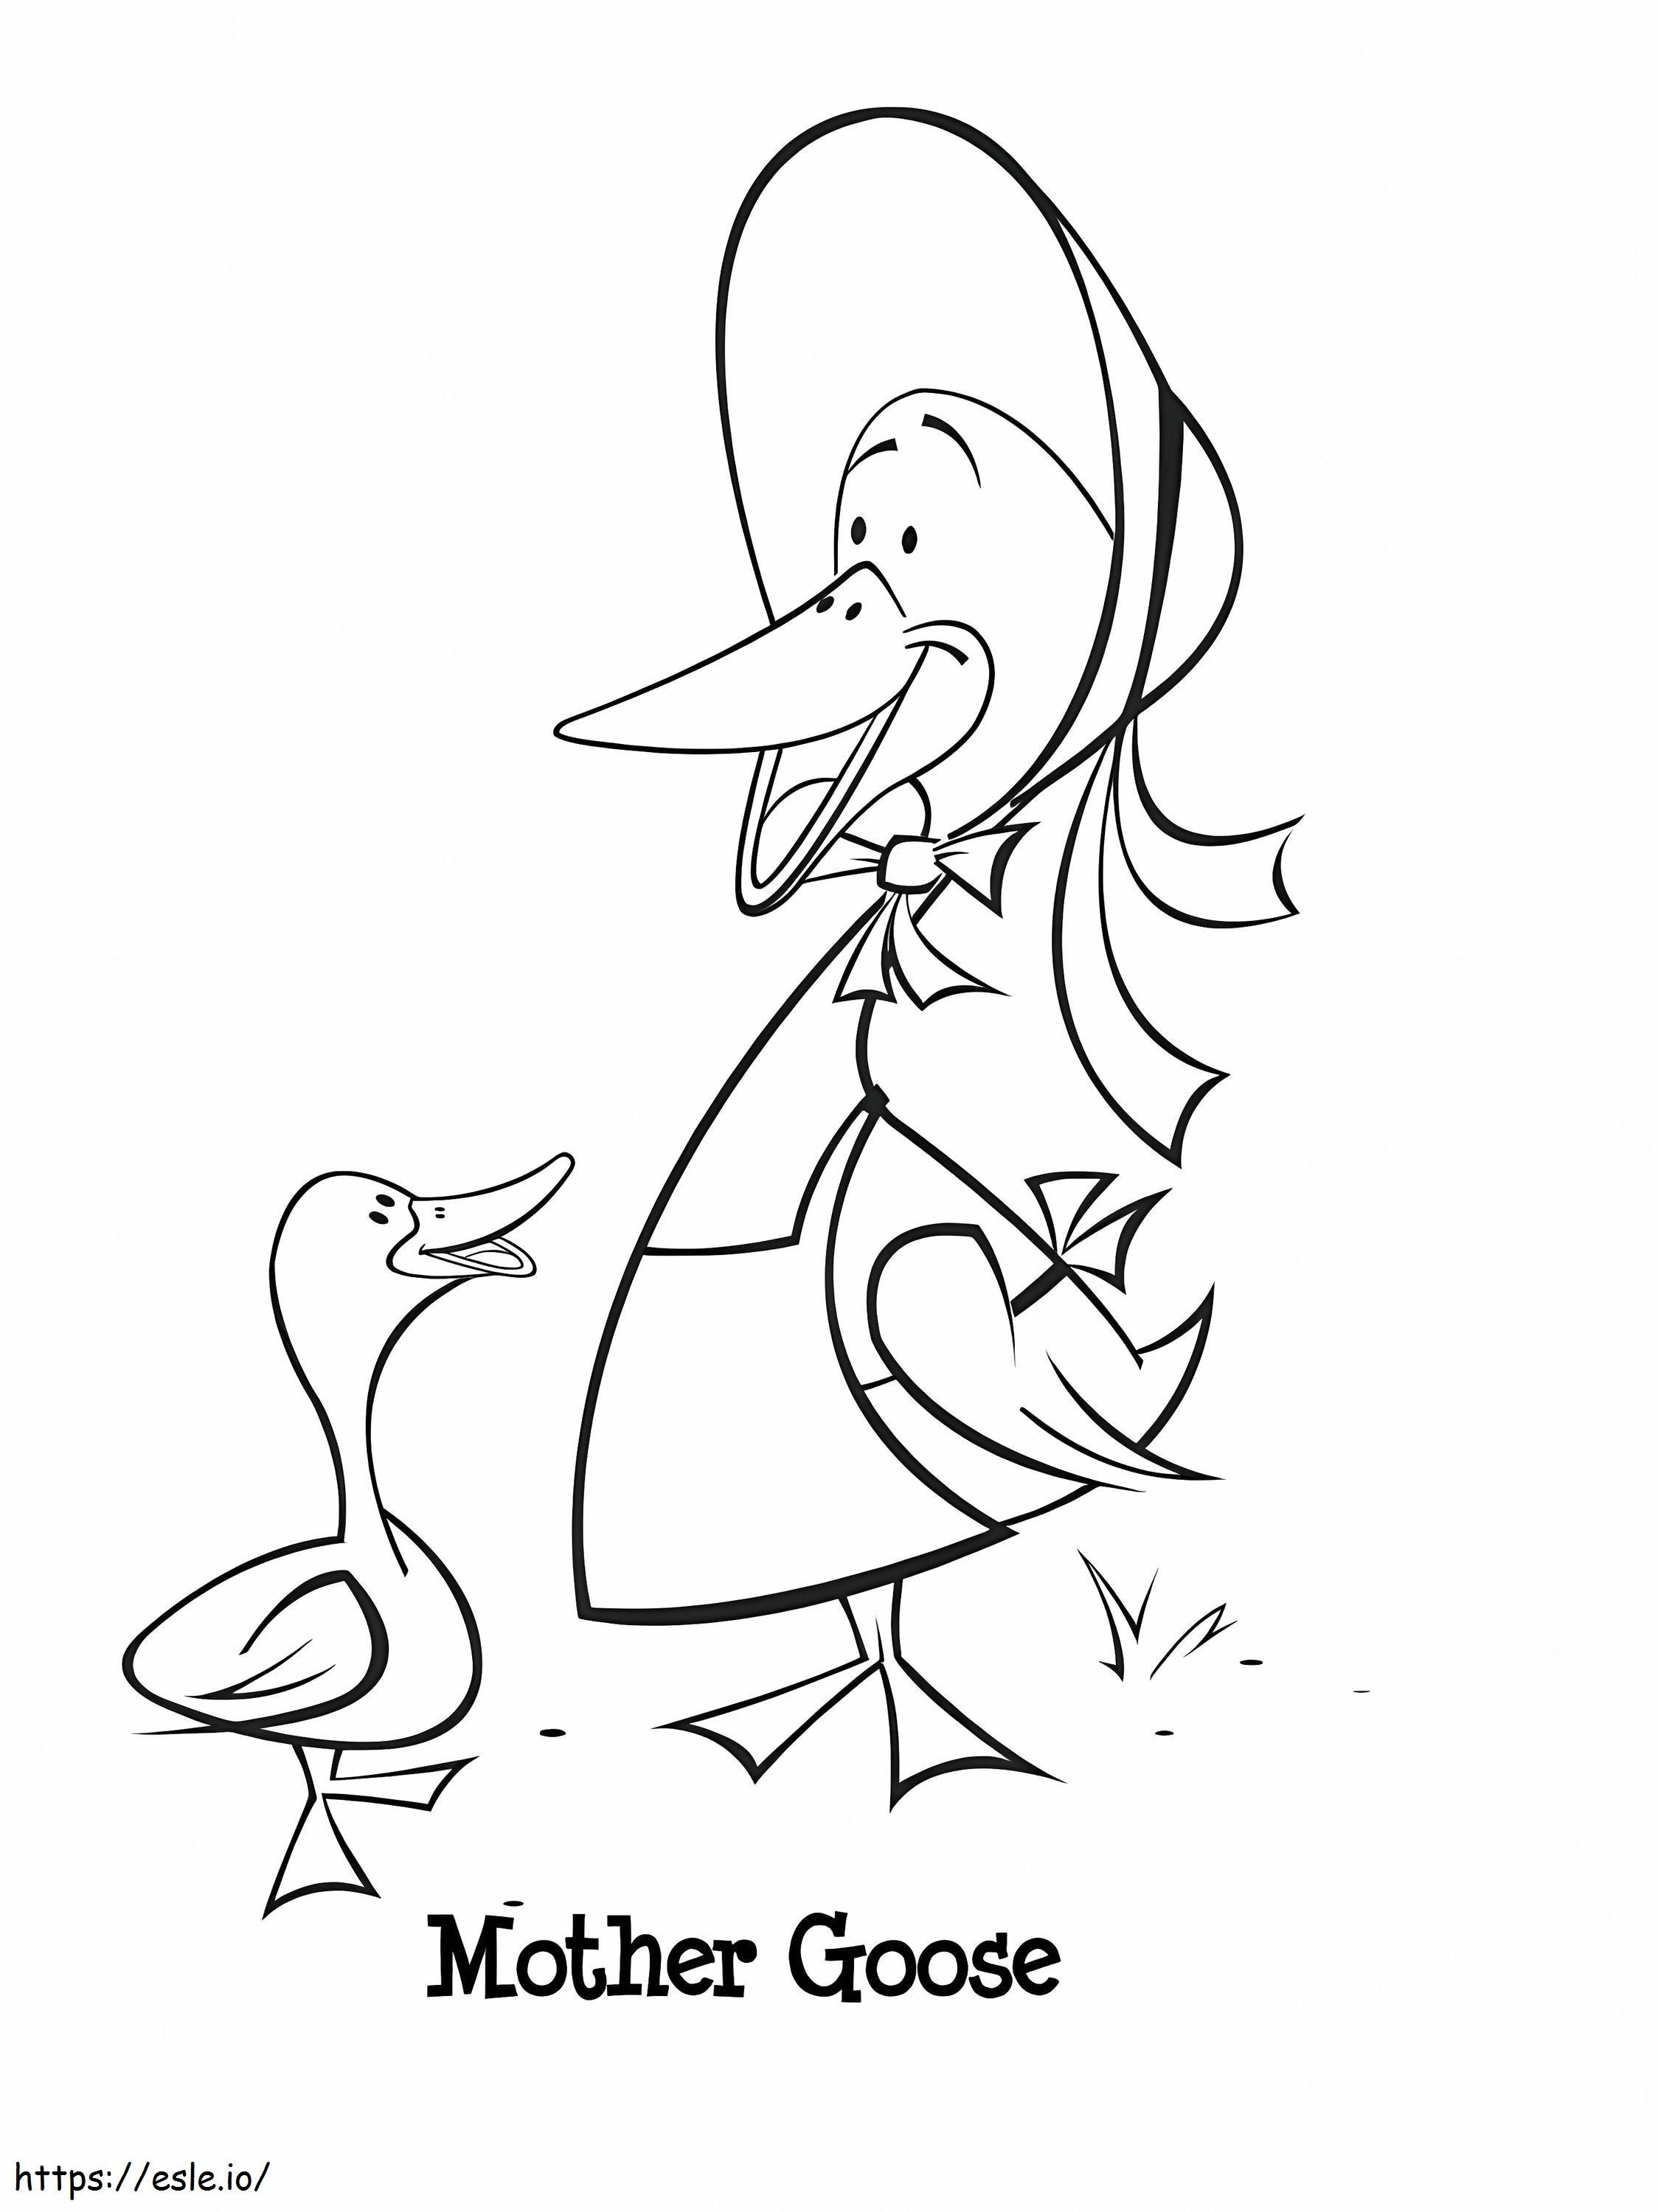 Mother Goose 7 coloring page